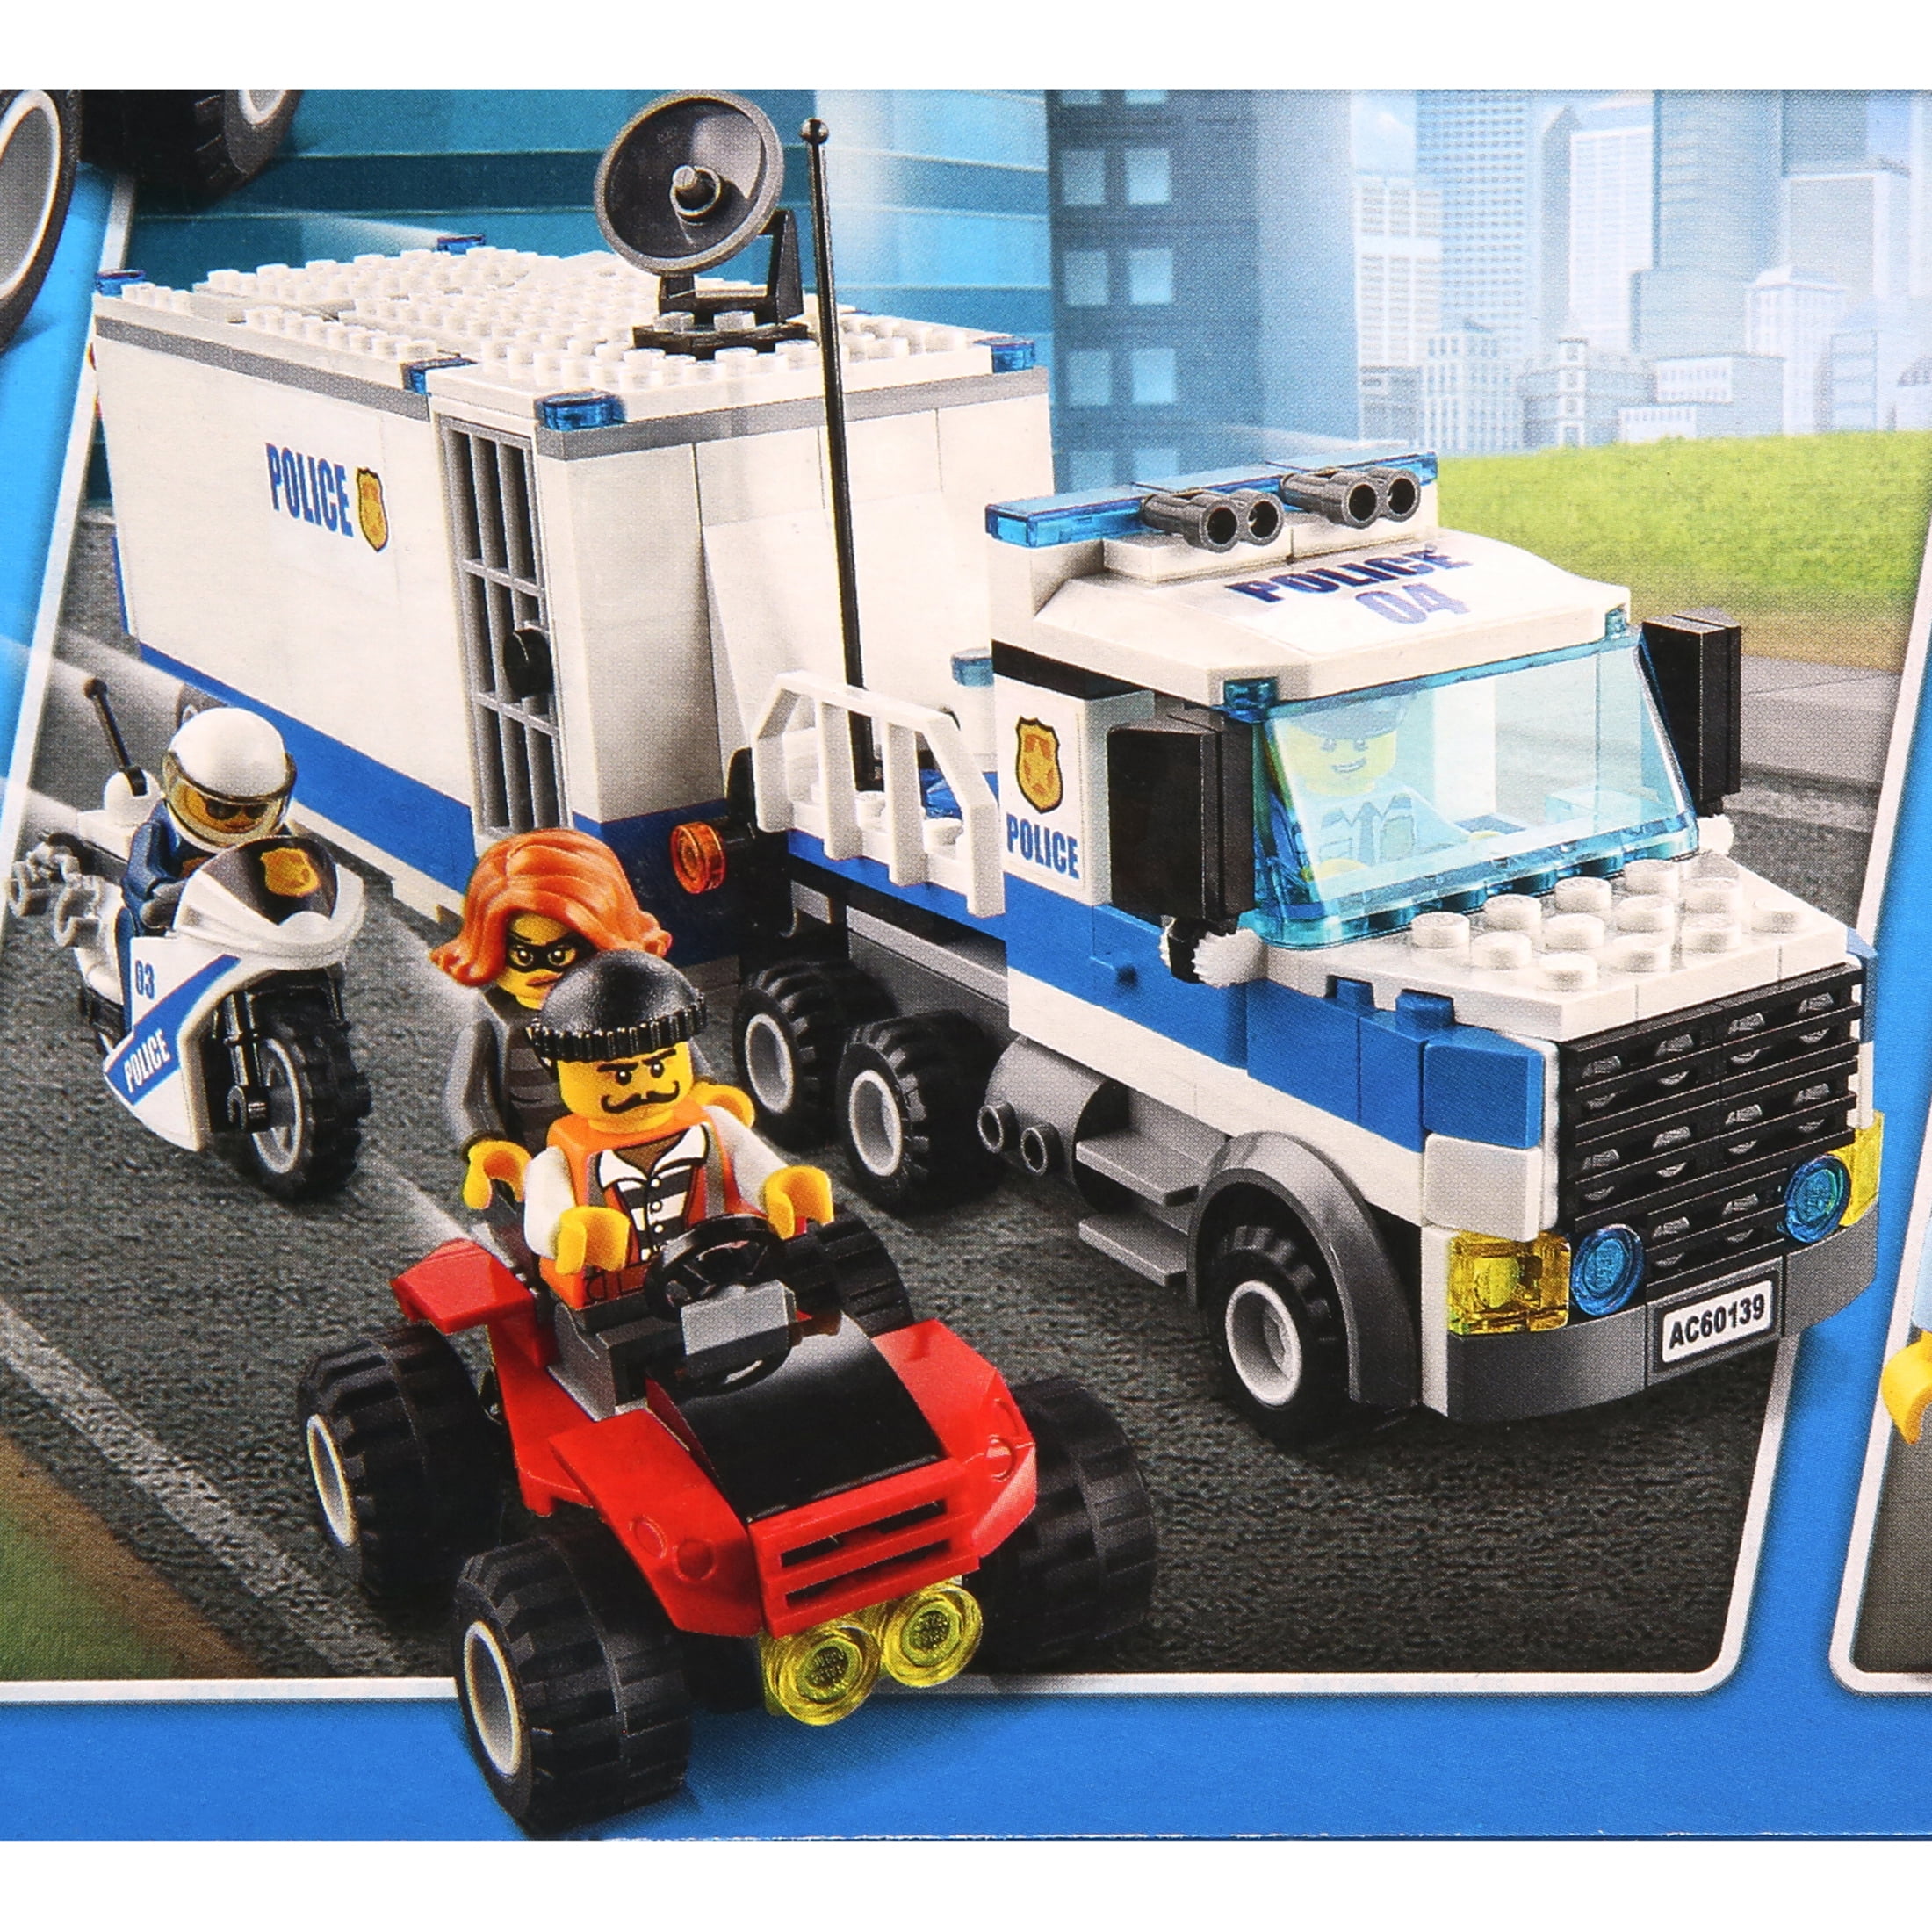 LEGO City Police Mobile Command Center Truck 60139 Building Toy 374 Pieces Action Cop Motorbike and ATV Play Set for Boys and Girls aged 6 to 12 